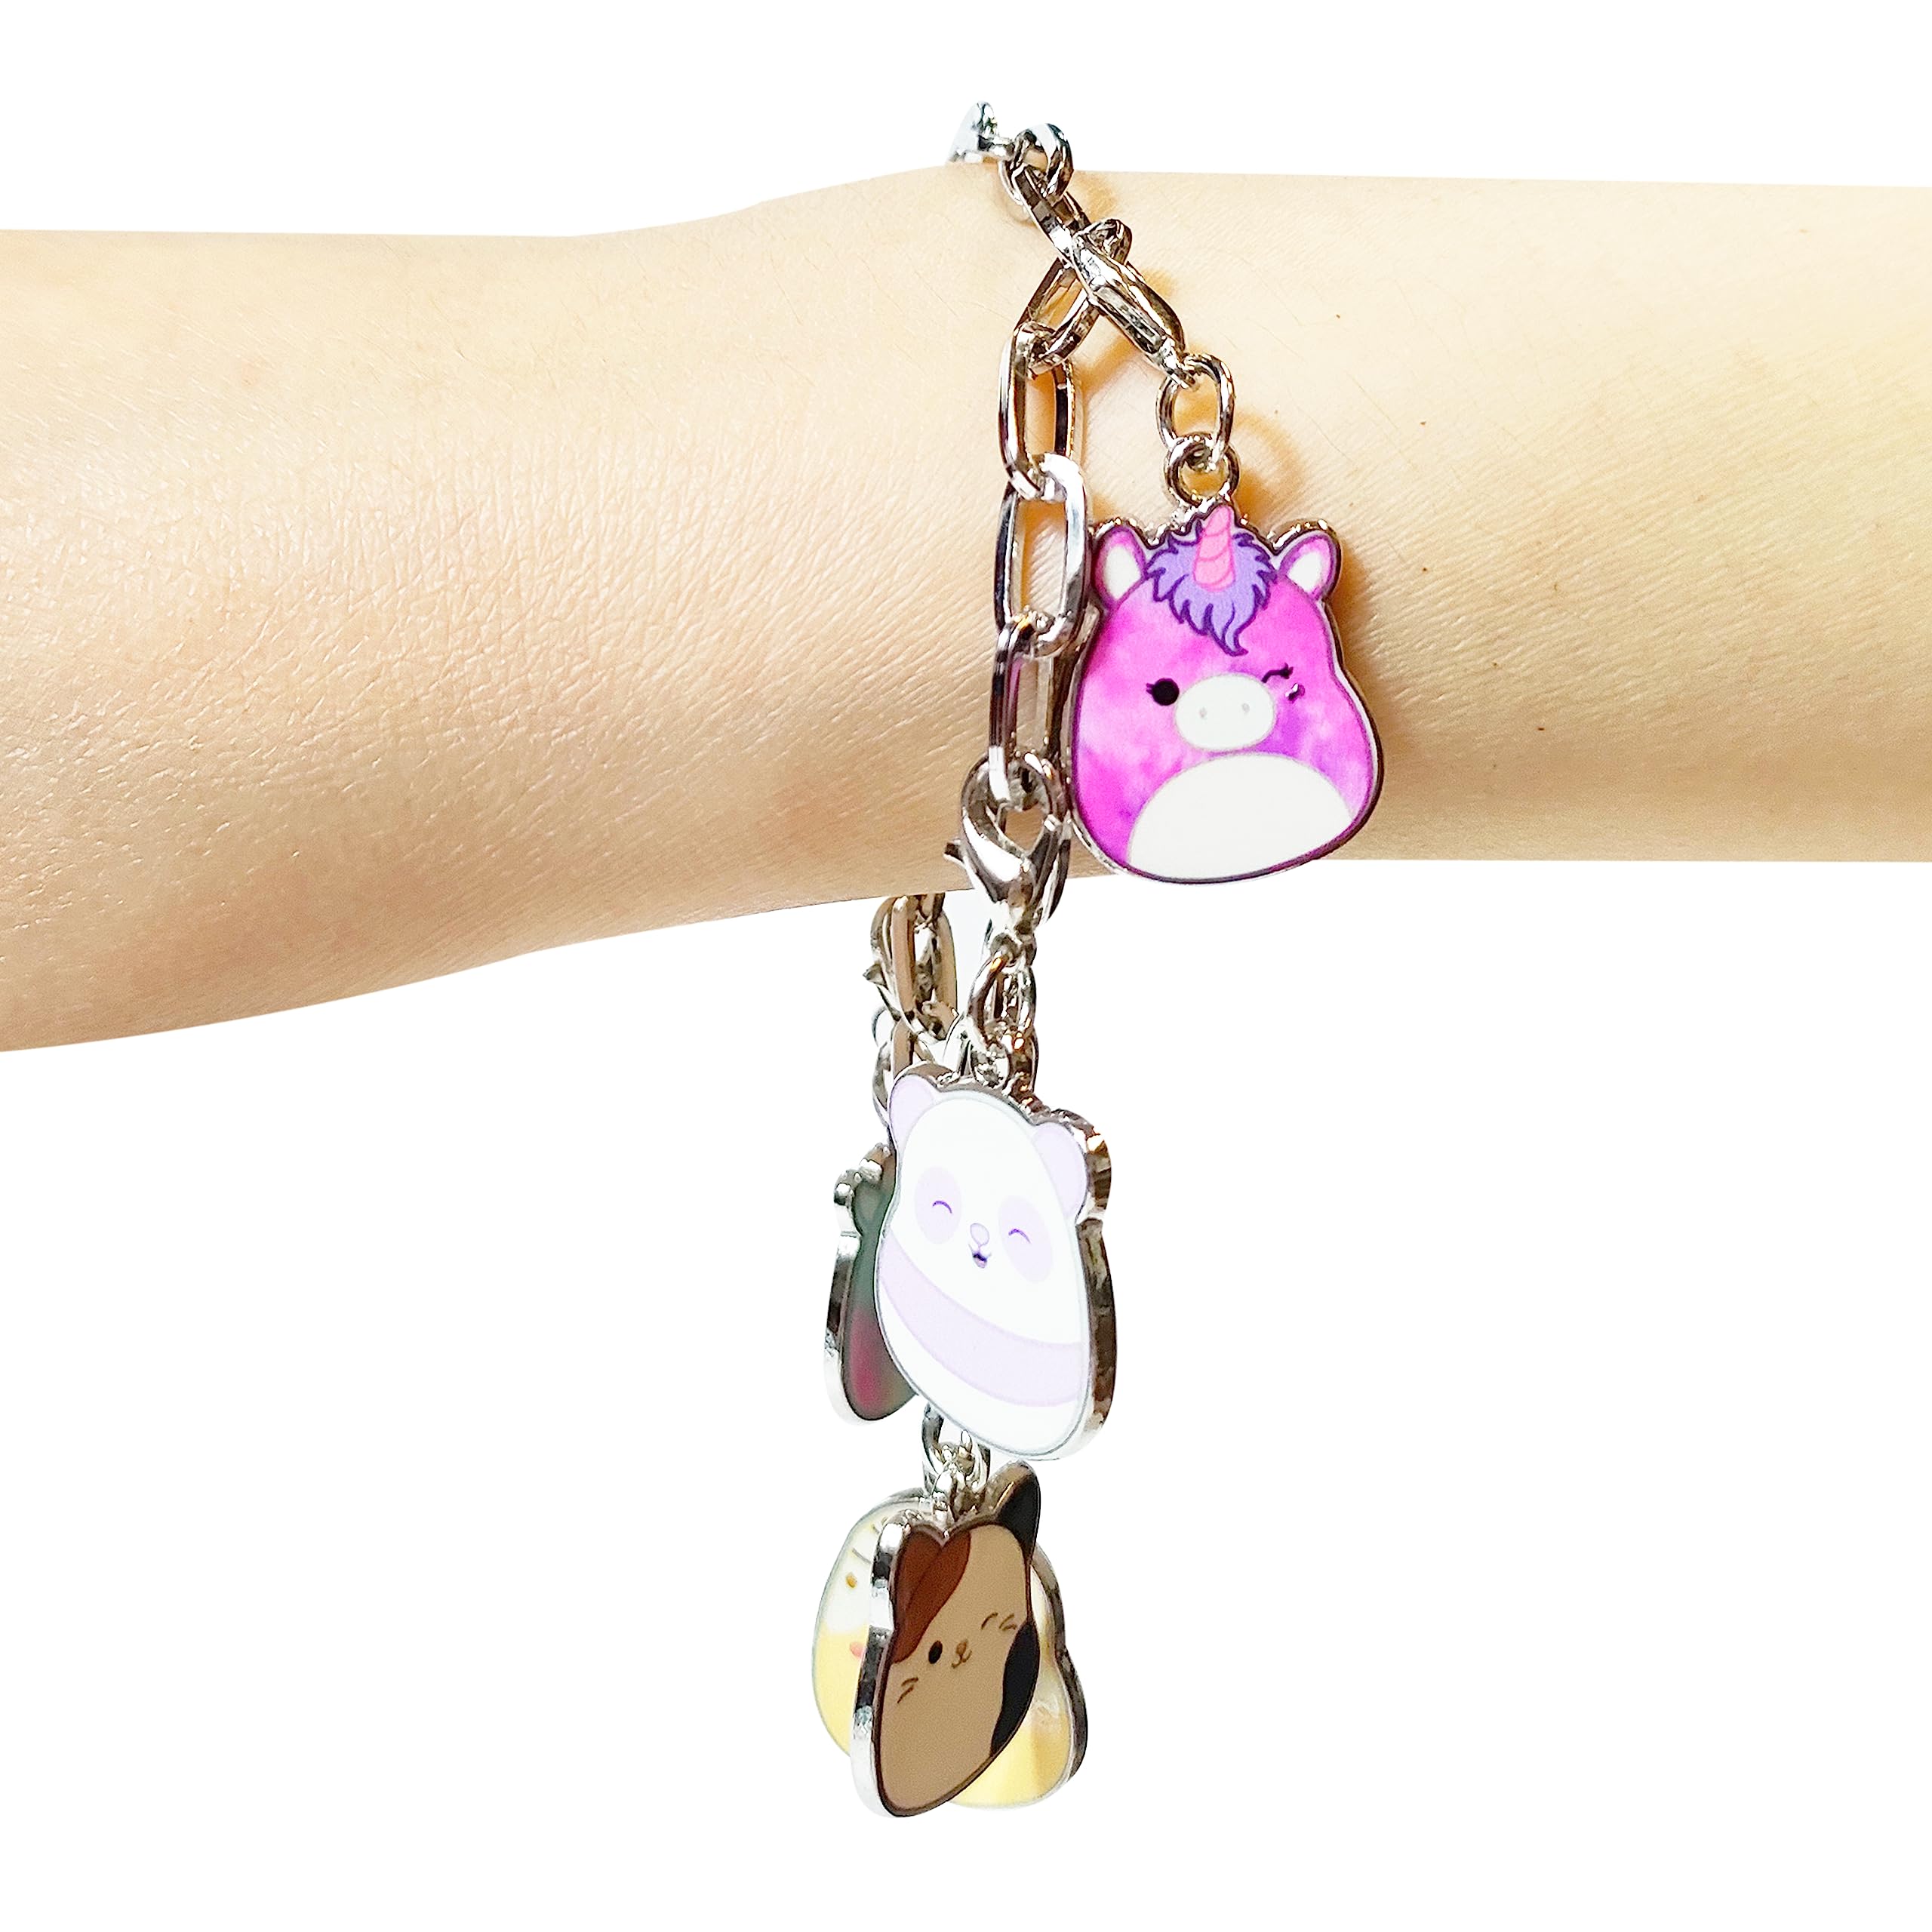 LUV HER Squishmallow Girls Add A Charm Box Set with 1 Charm Bracelet & 5 Interchangeable Charms - Ages 3+